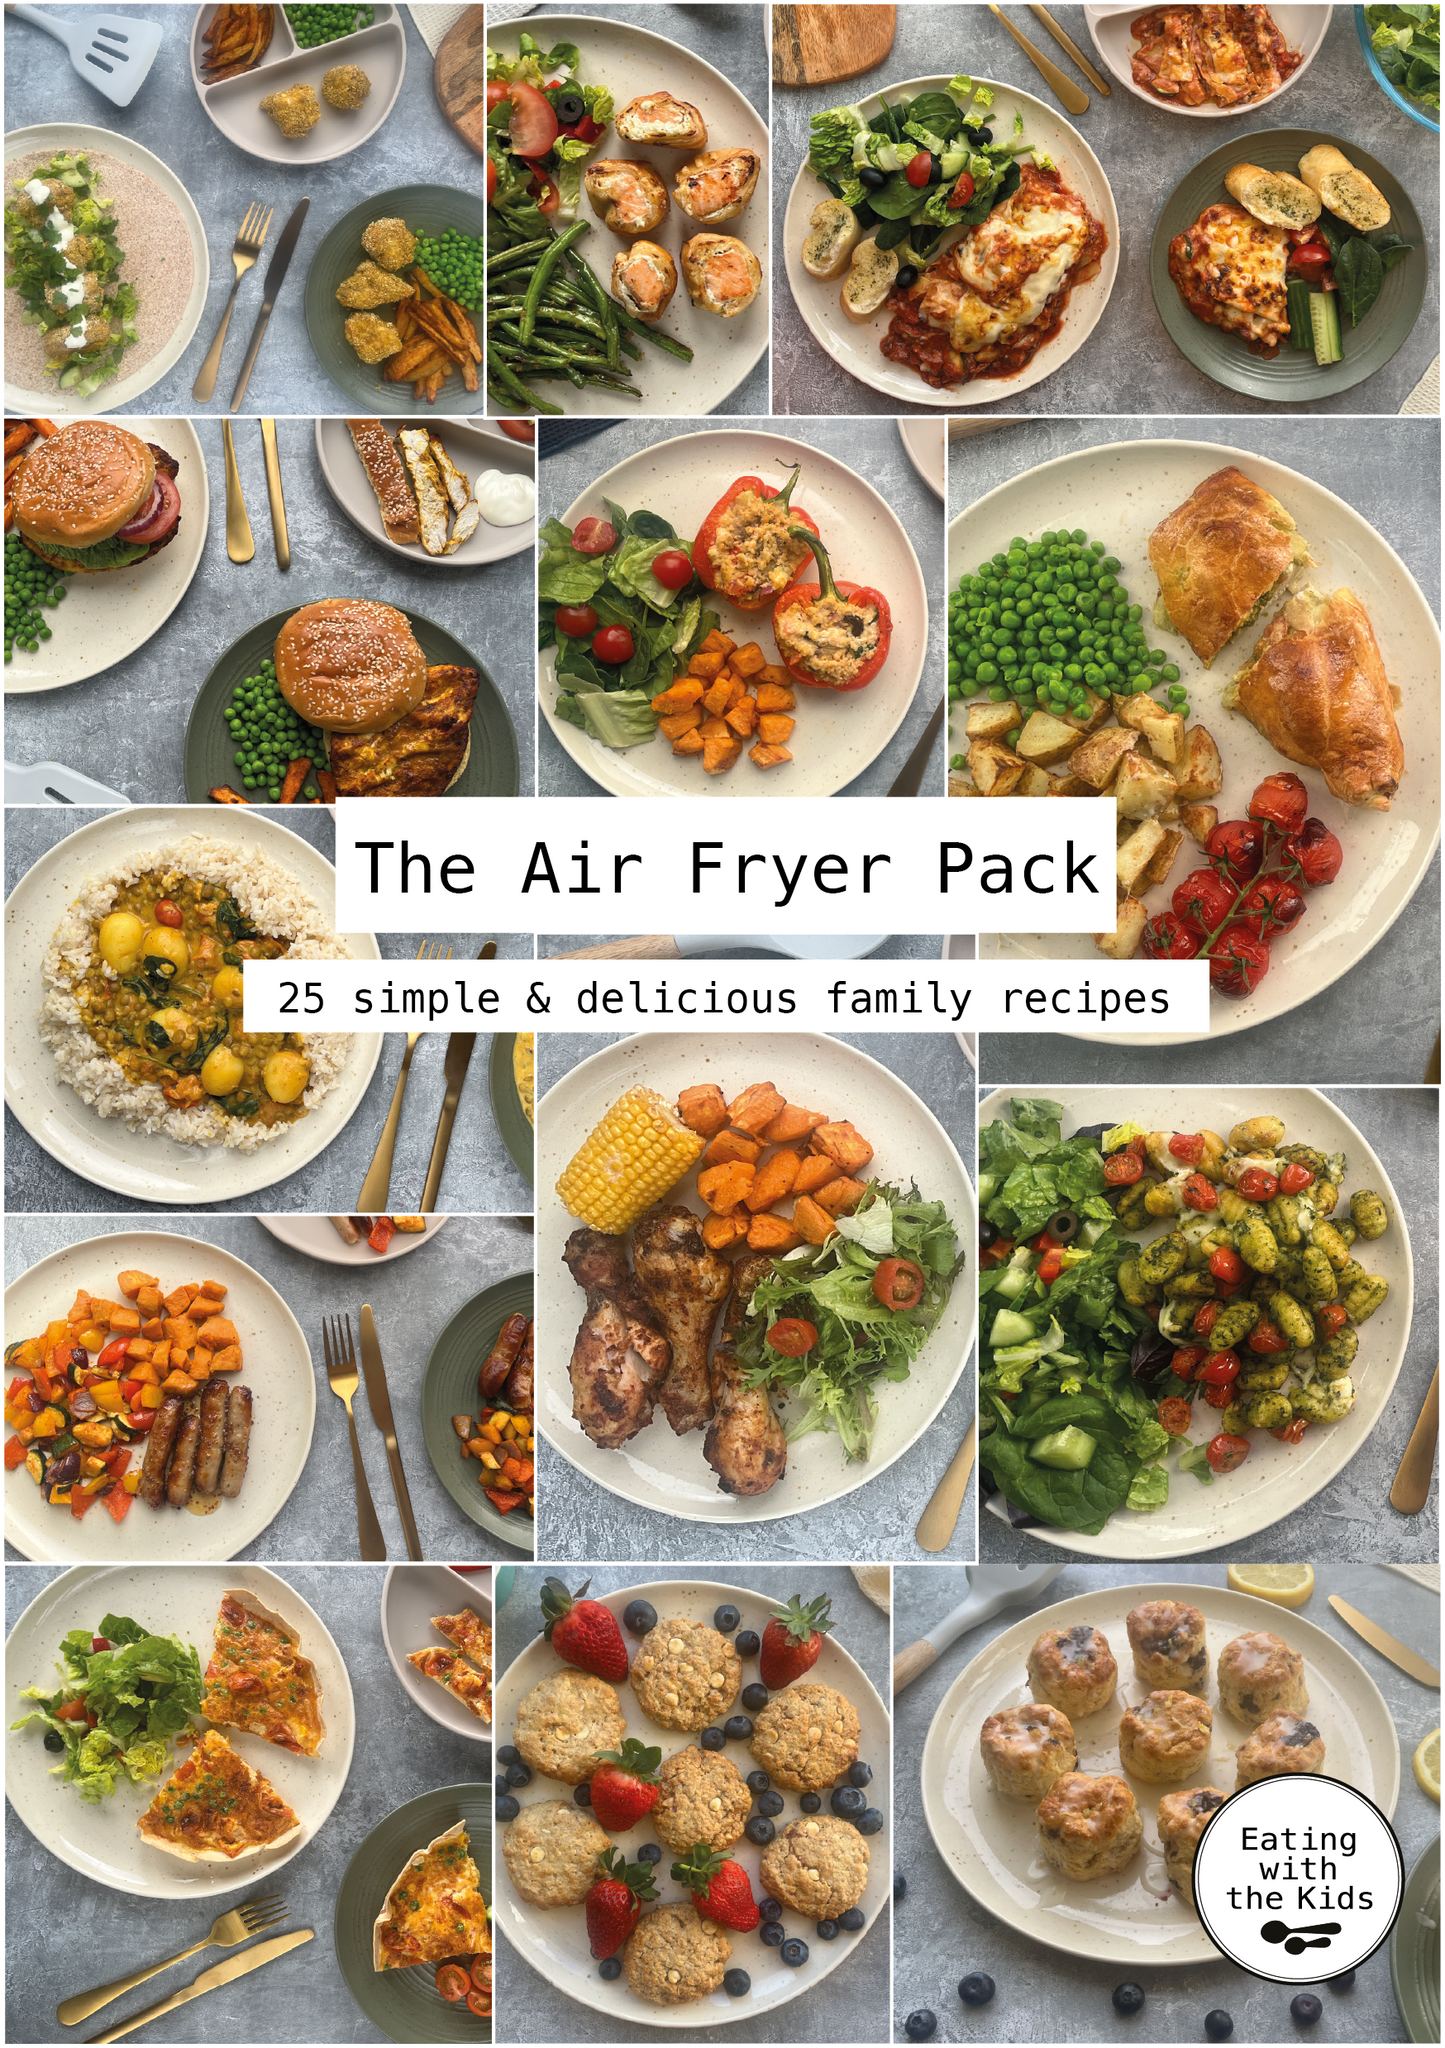 The Air Fryer Pack (Downloadable PDF)